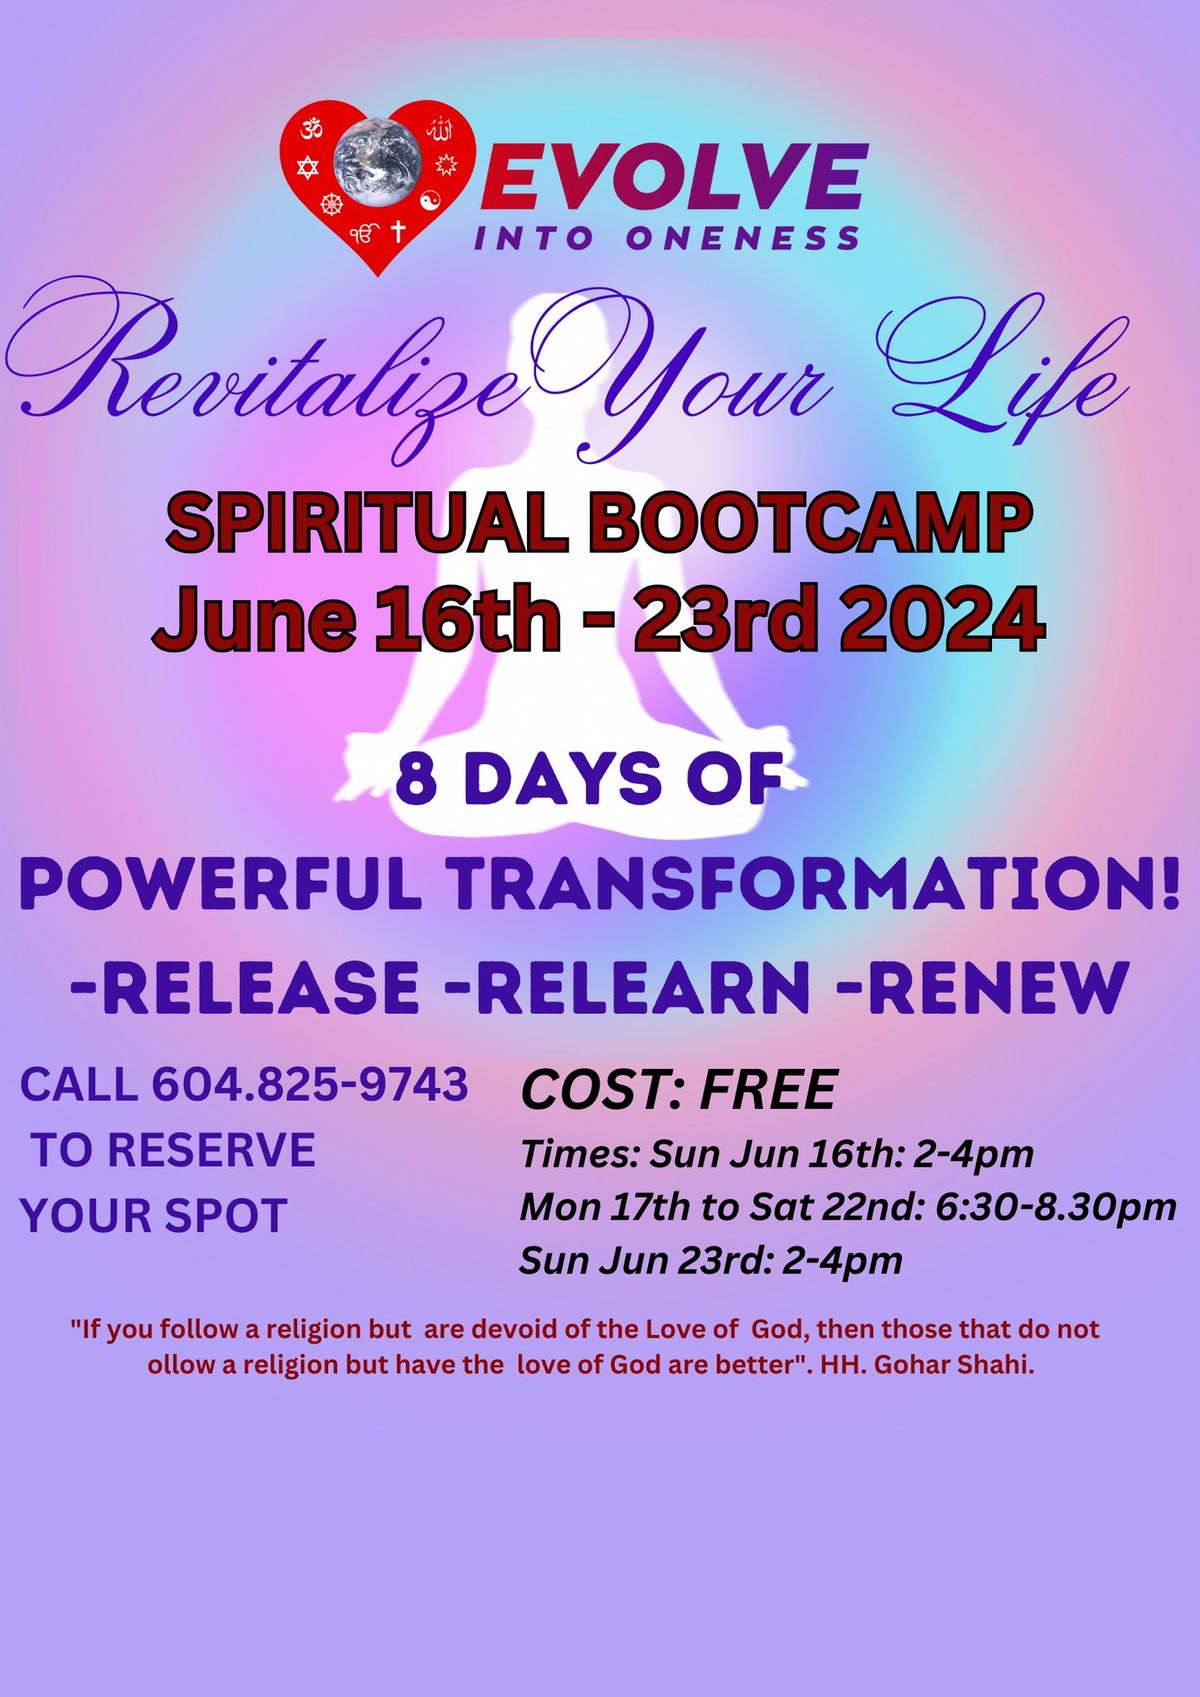 Spiritual Bootcamp.  8 DAYS OF  POWERFUL TRANSFORMATION!  Release -Relearn -Renew